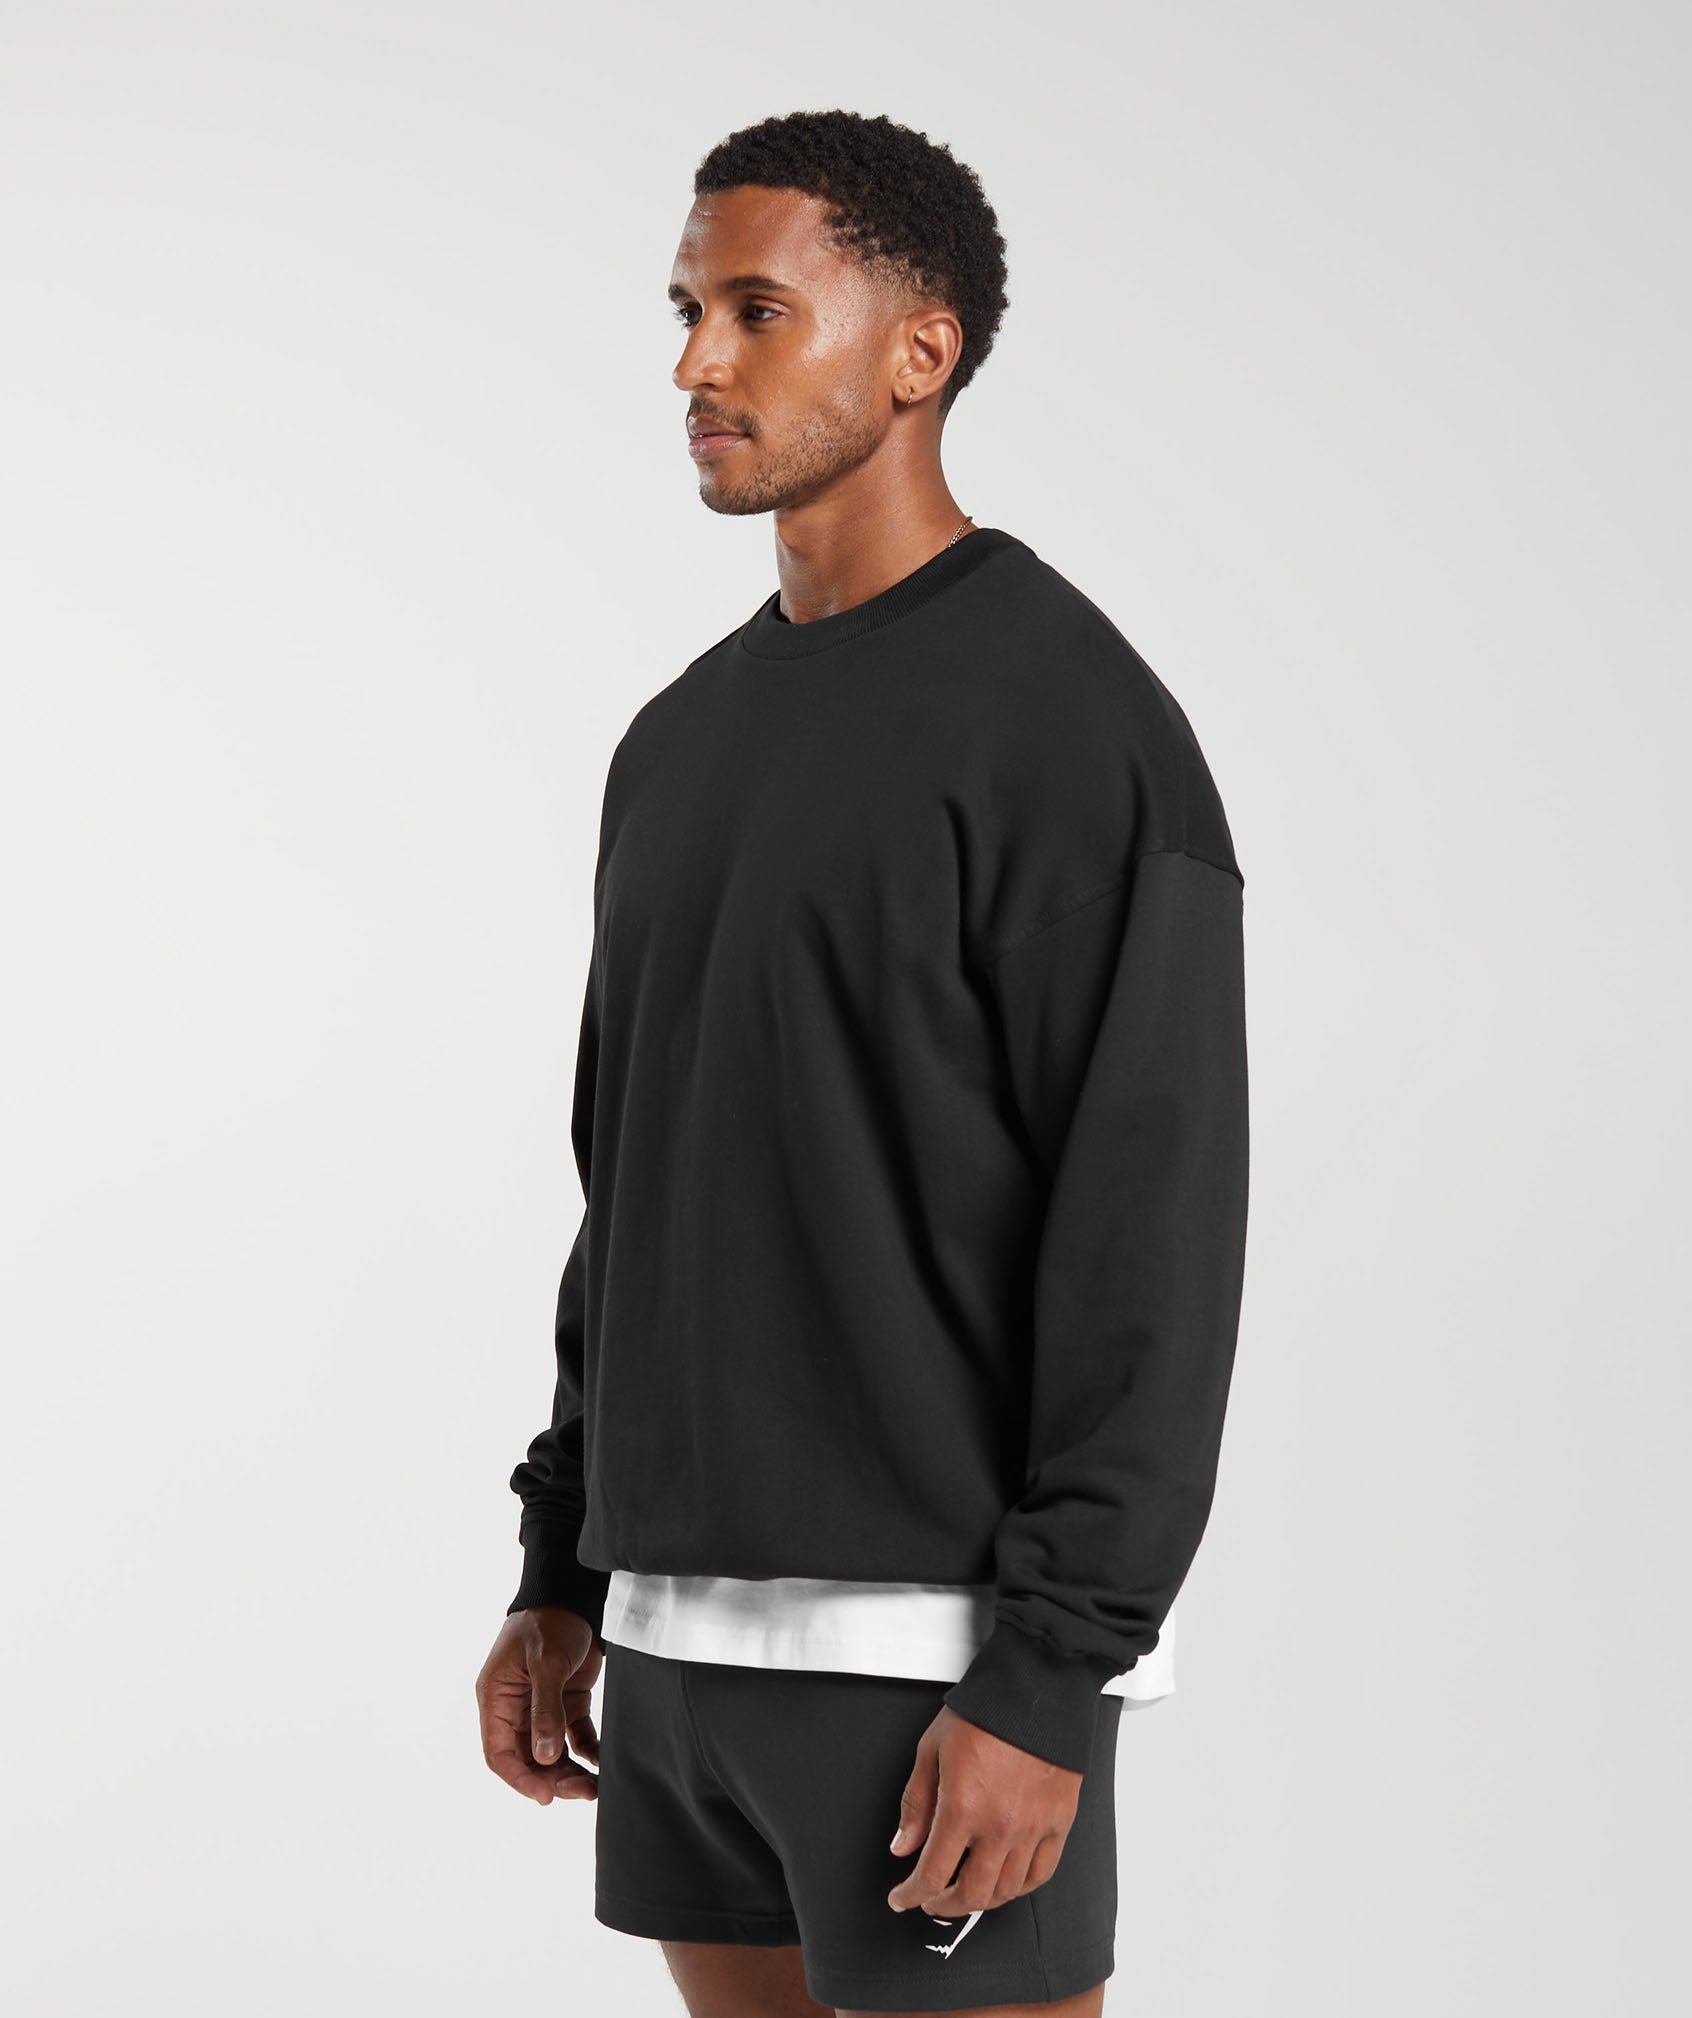 Rest Day Essential Crew in Black - view 3